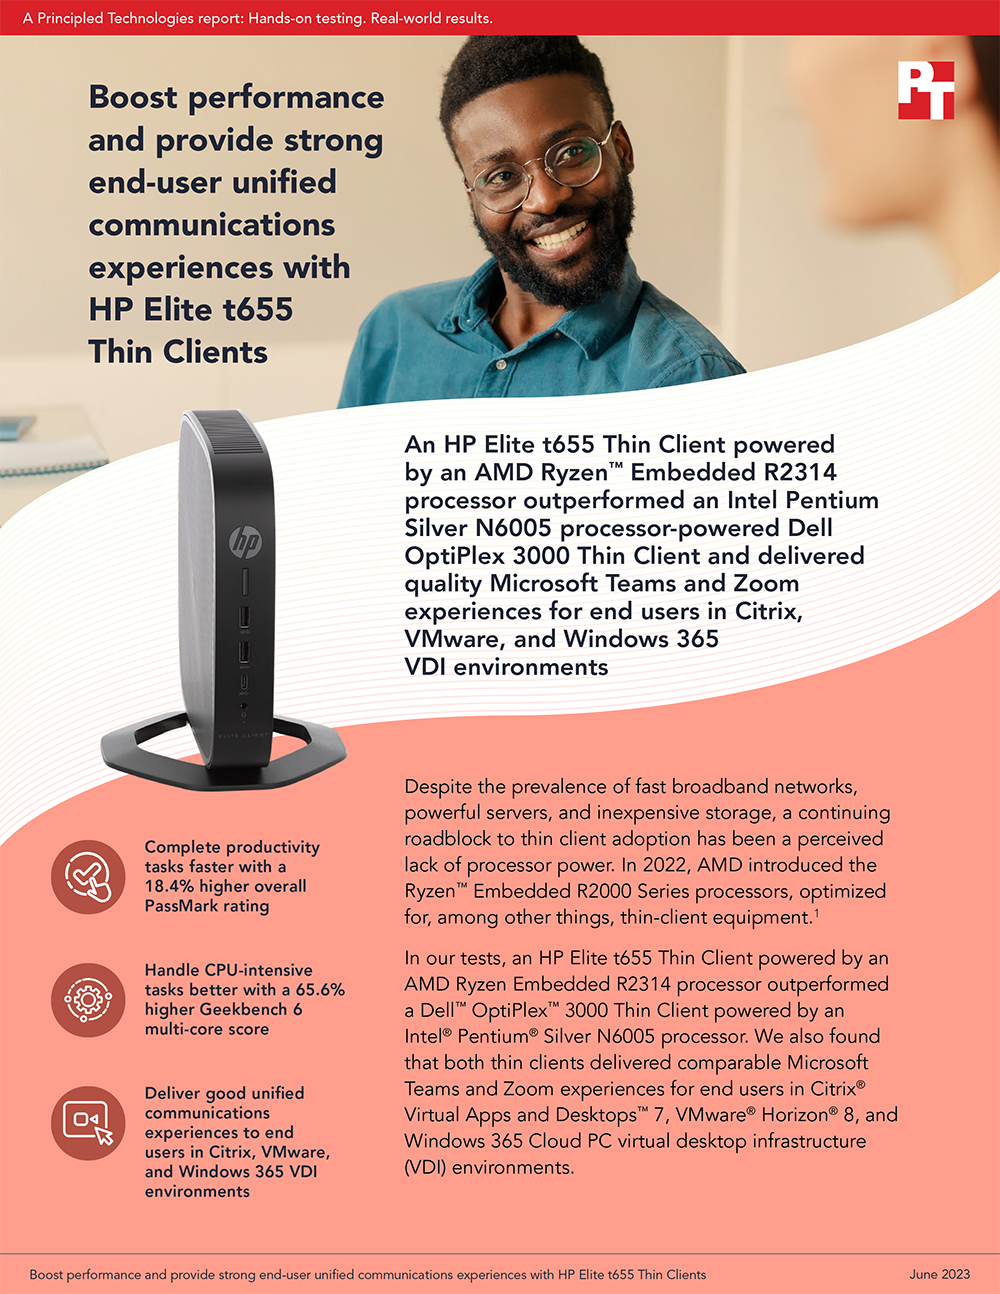  Boost performance and provide strong end-user unified communications experiences with HP Elite t655 Thin Clients